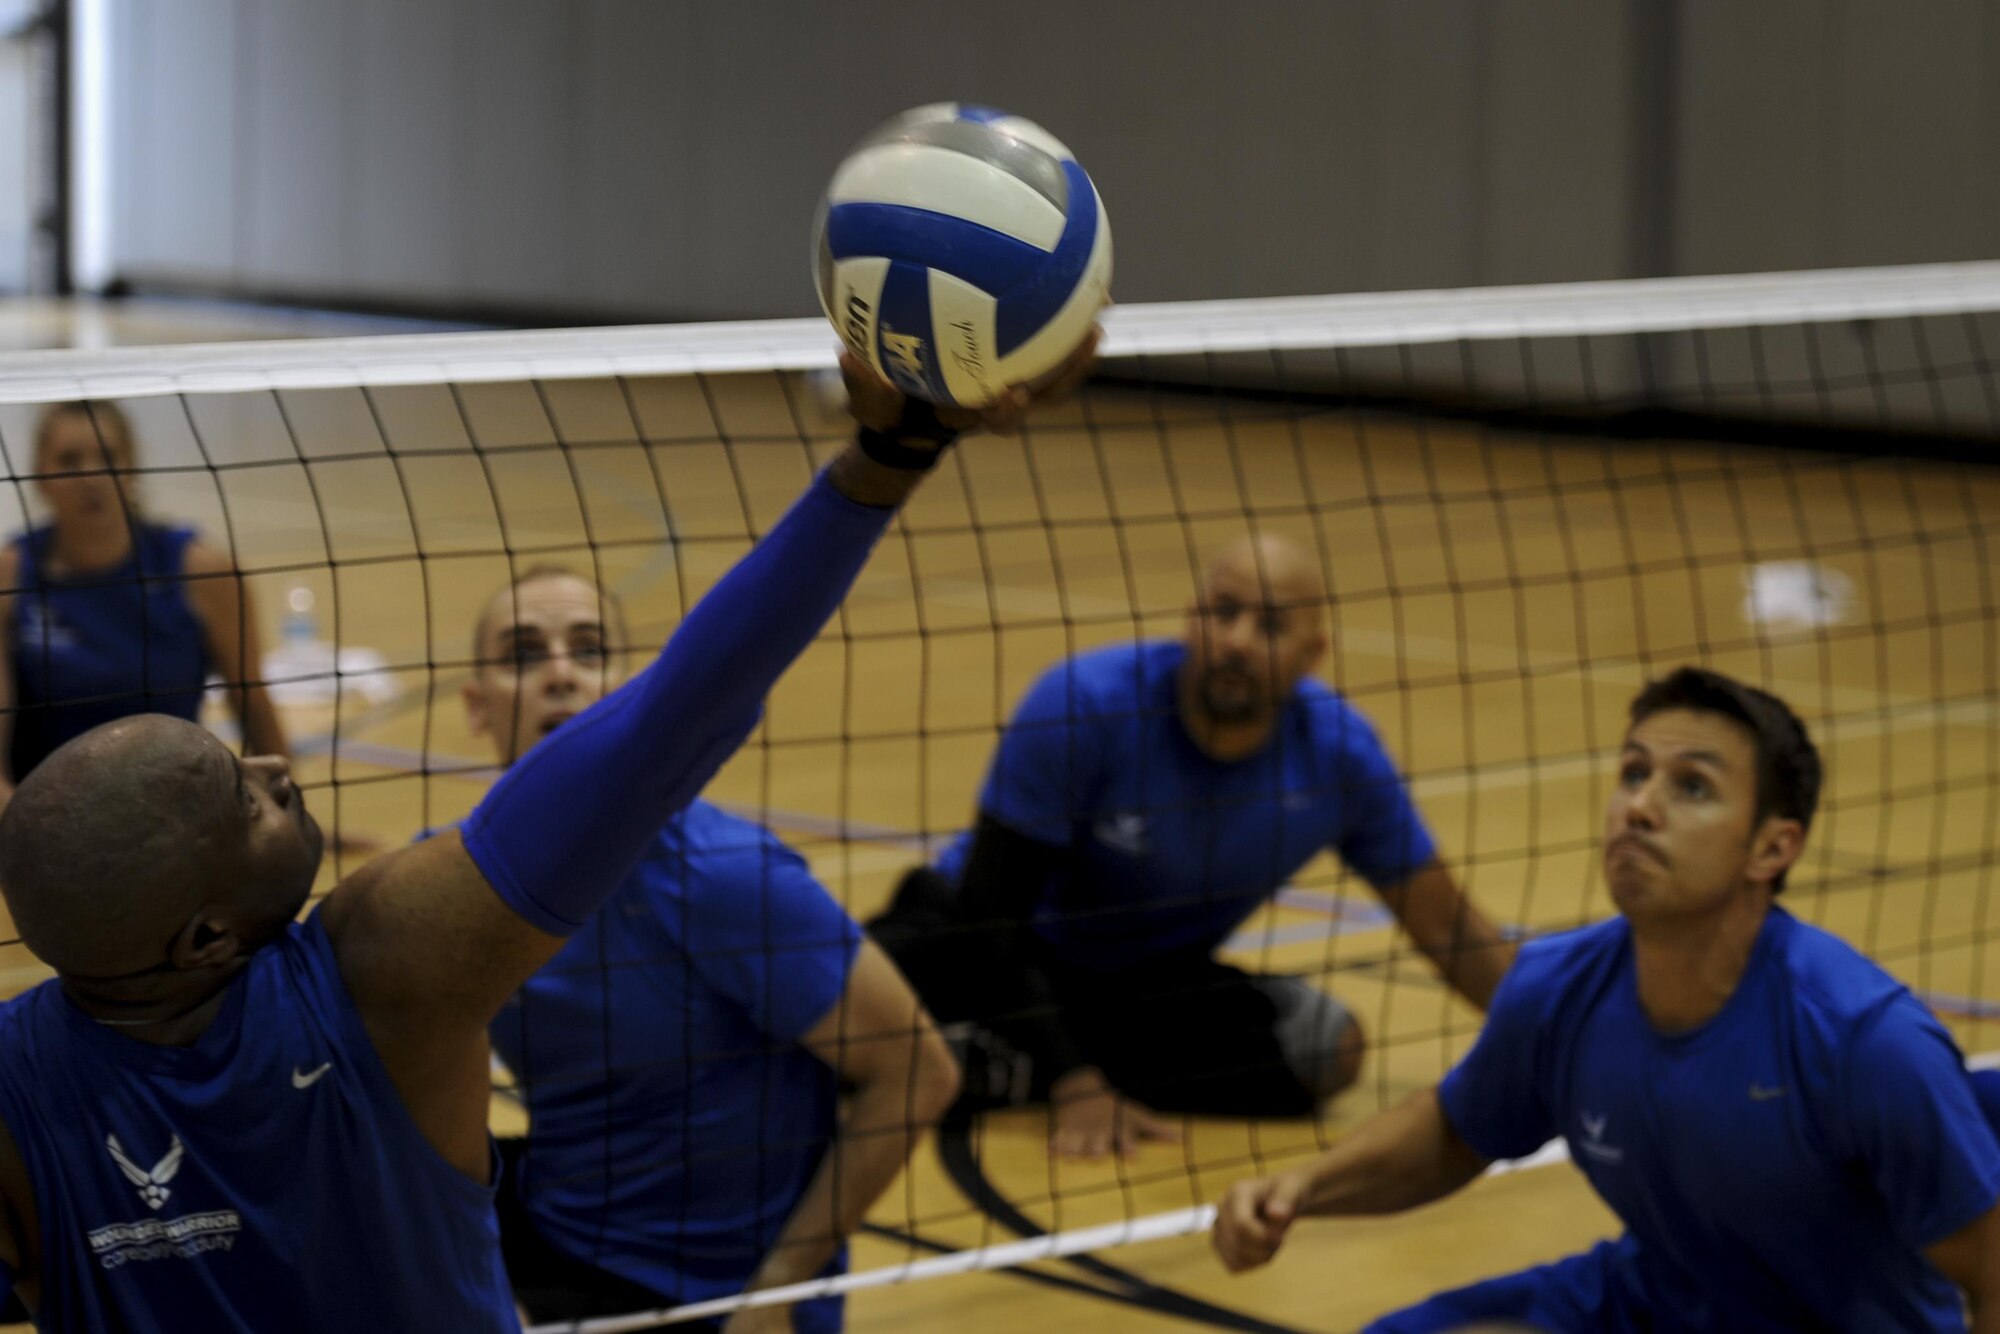 Larry O'Neil, a member of the Air Force sitting volleyball team, reaches back to set the volleyball at Hurlburt Field, Fla., April 24, 2017. Players participated in a variety of drills and a scrimmage game. (U.S. Air Force photo by Airman 1st Class Dennis Spain)